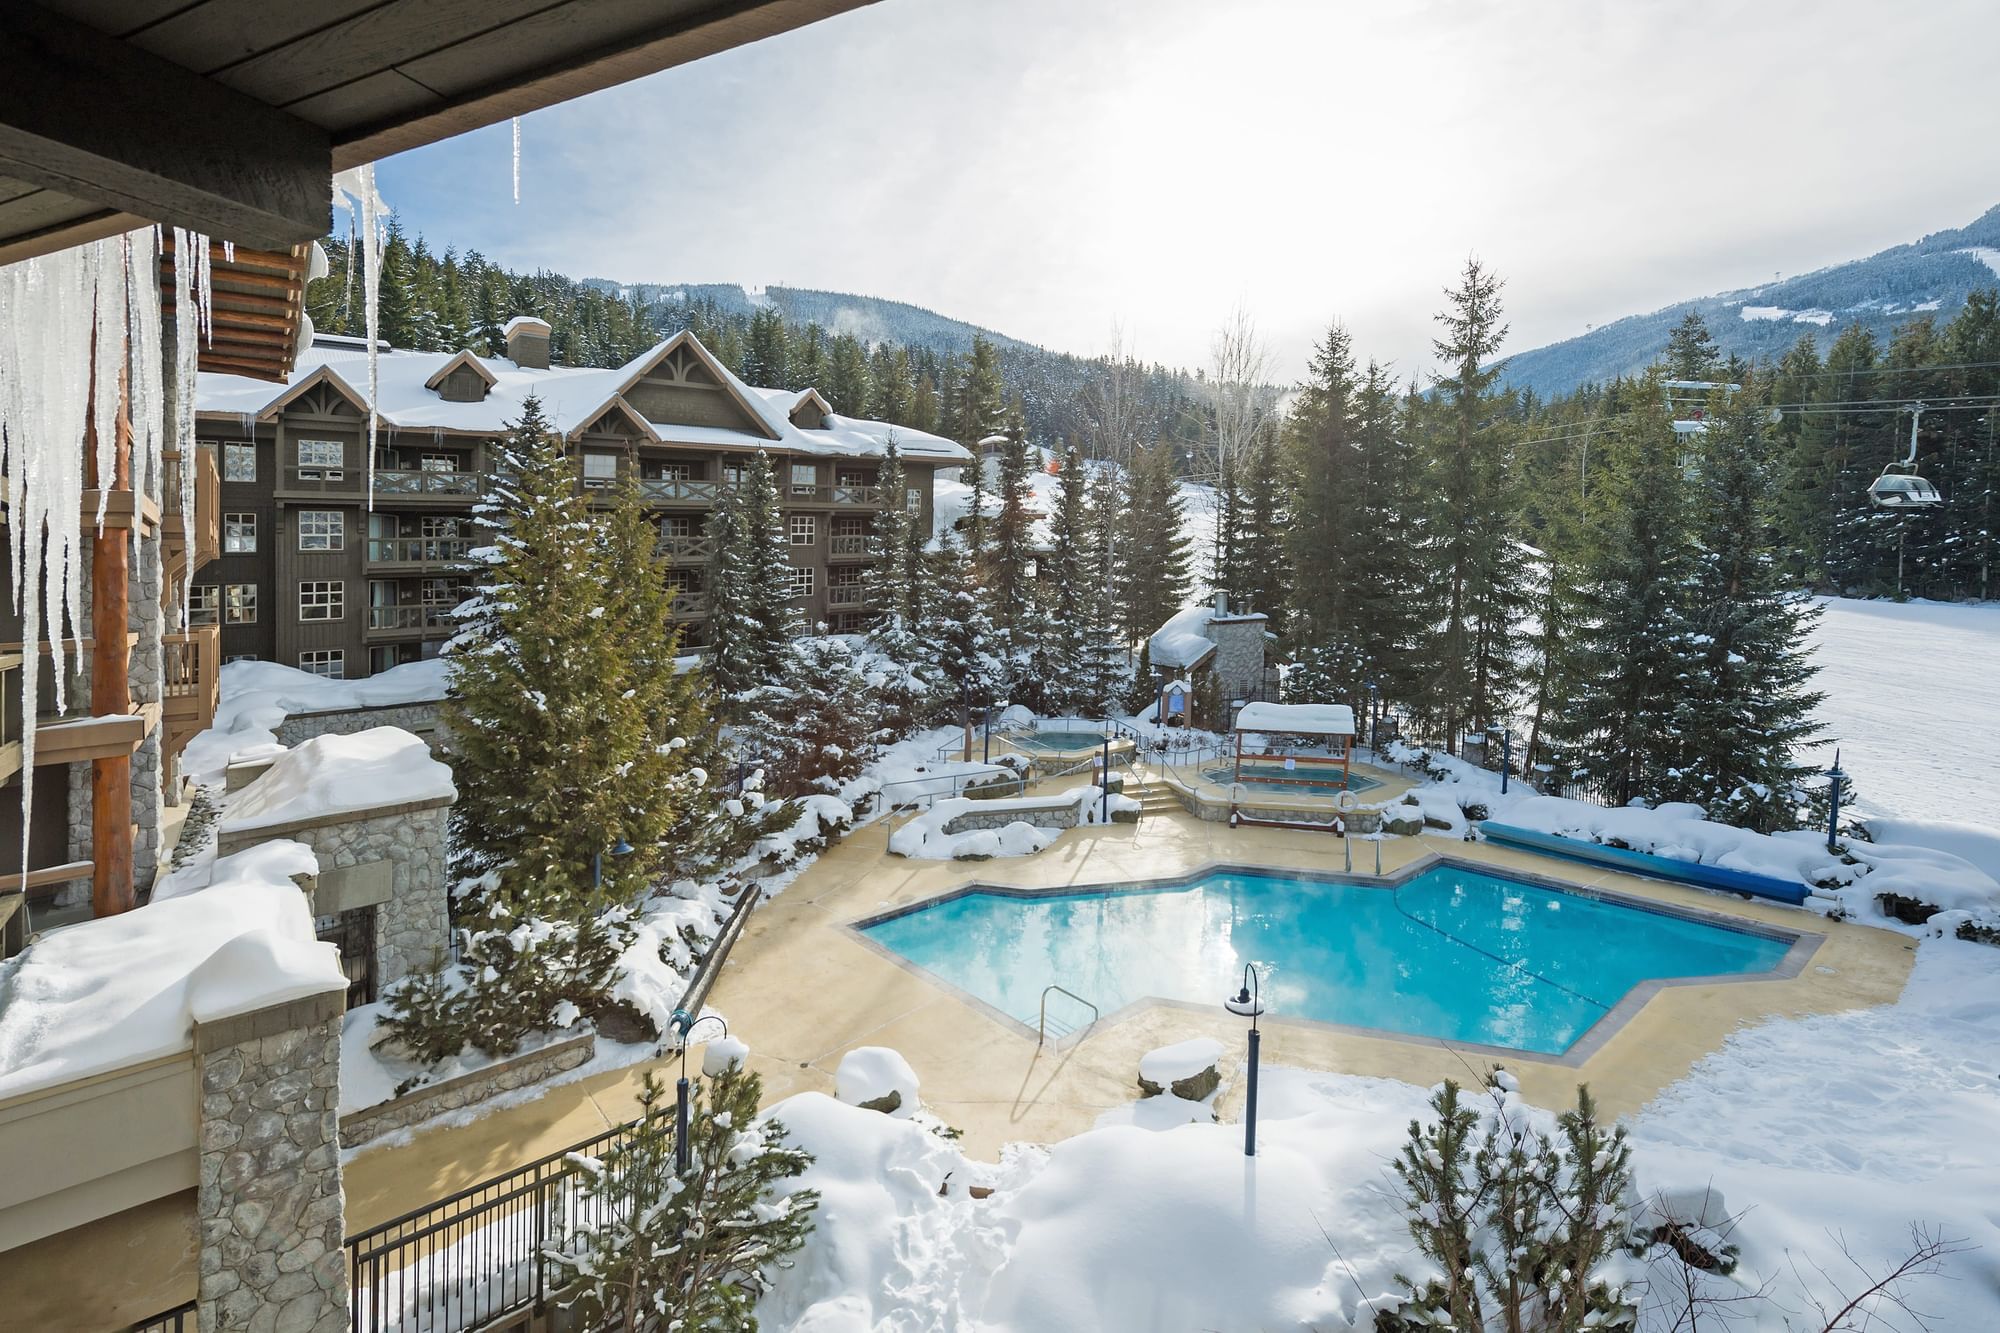 Panaromic view of the outdoor pool by hotel buildings at Blackcomb Springs Suites